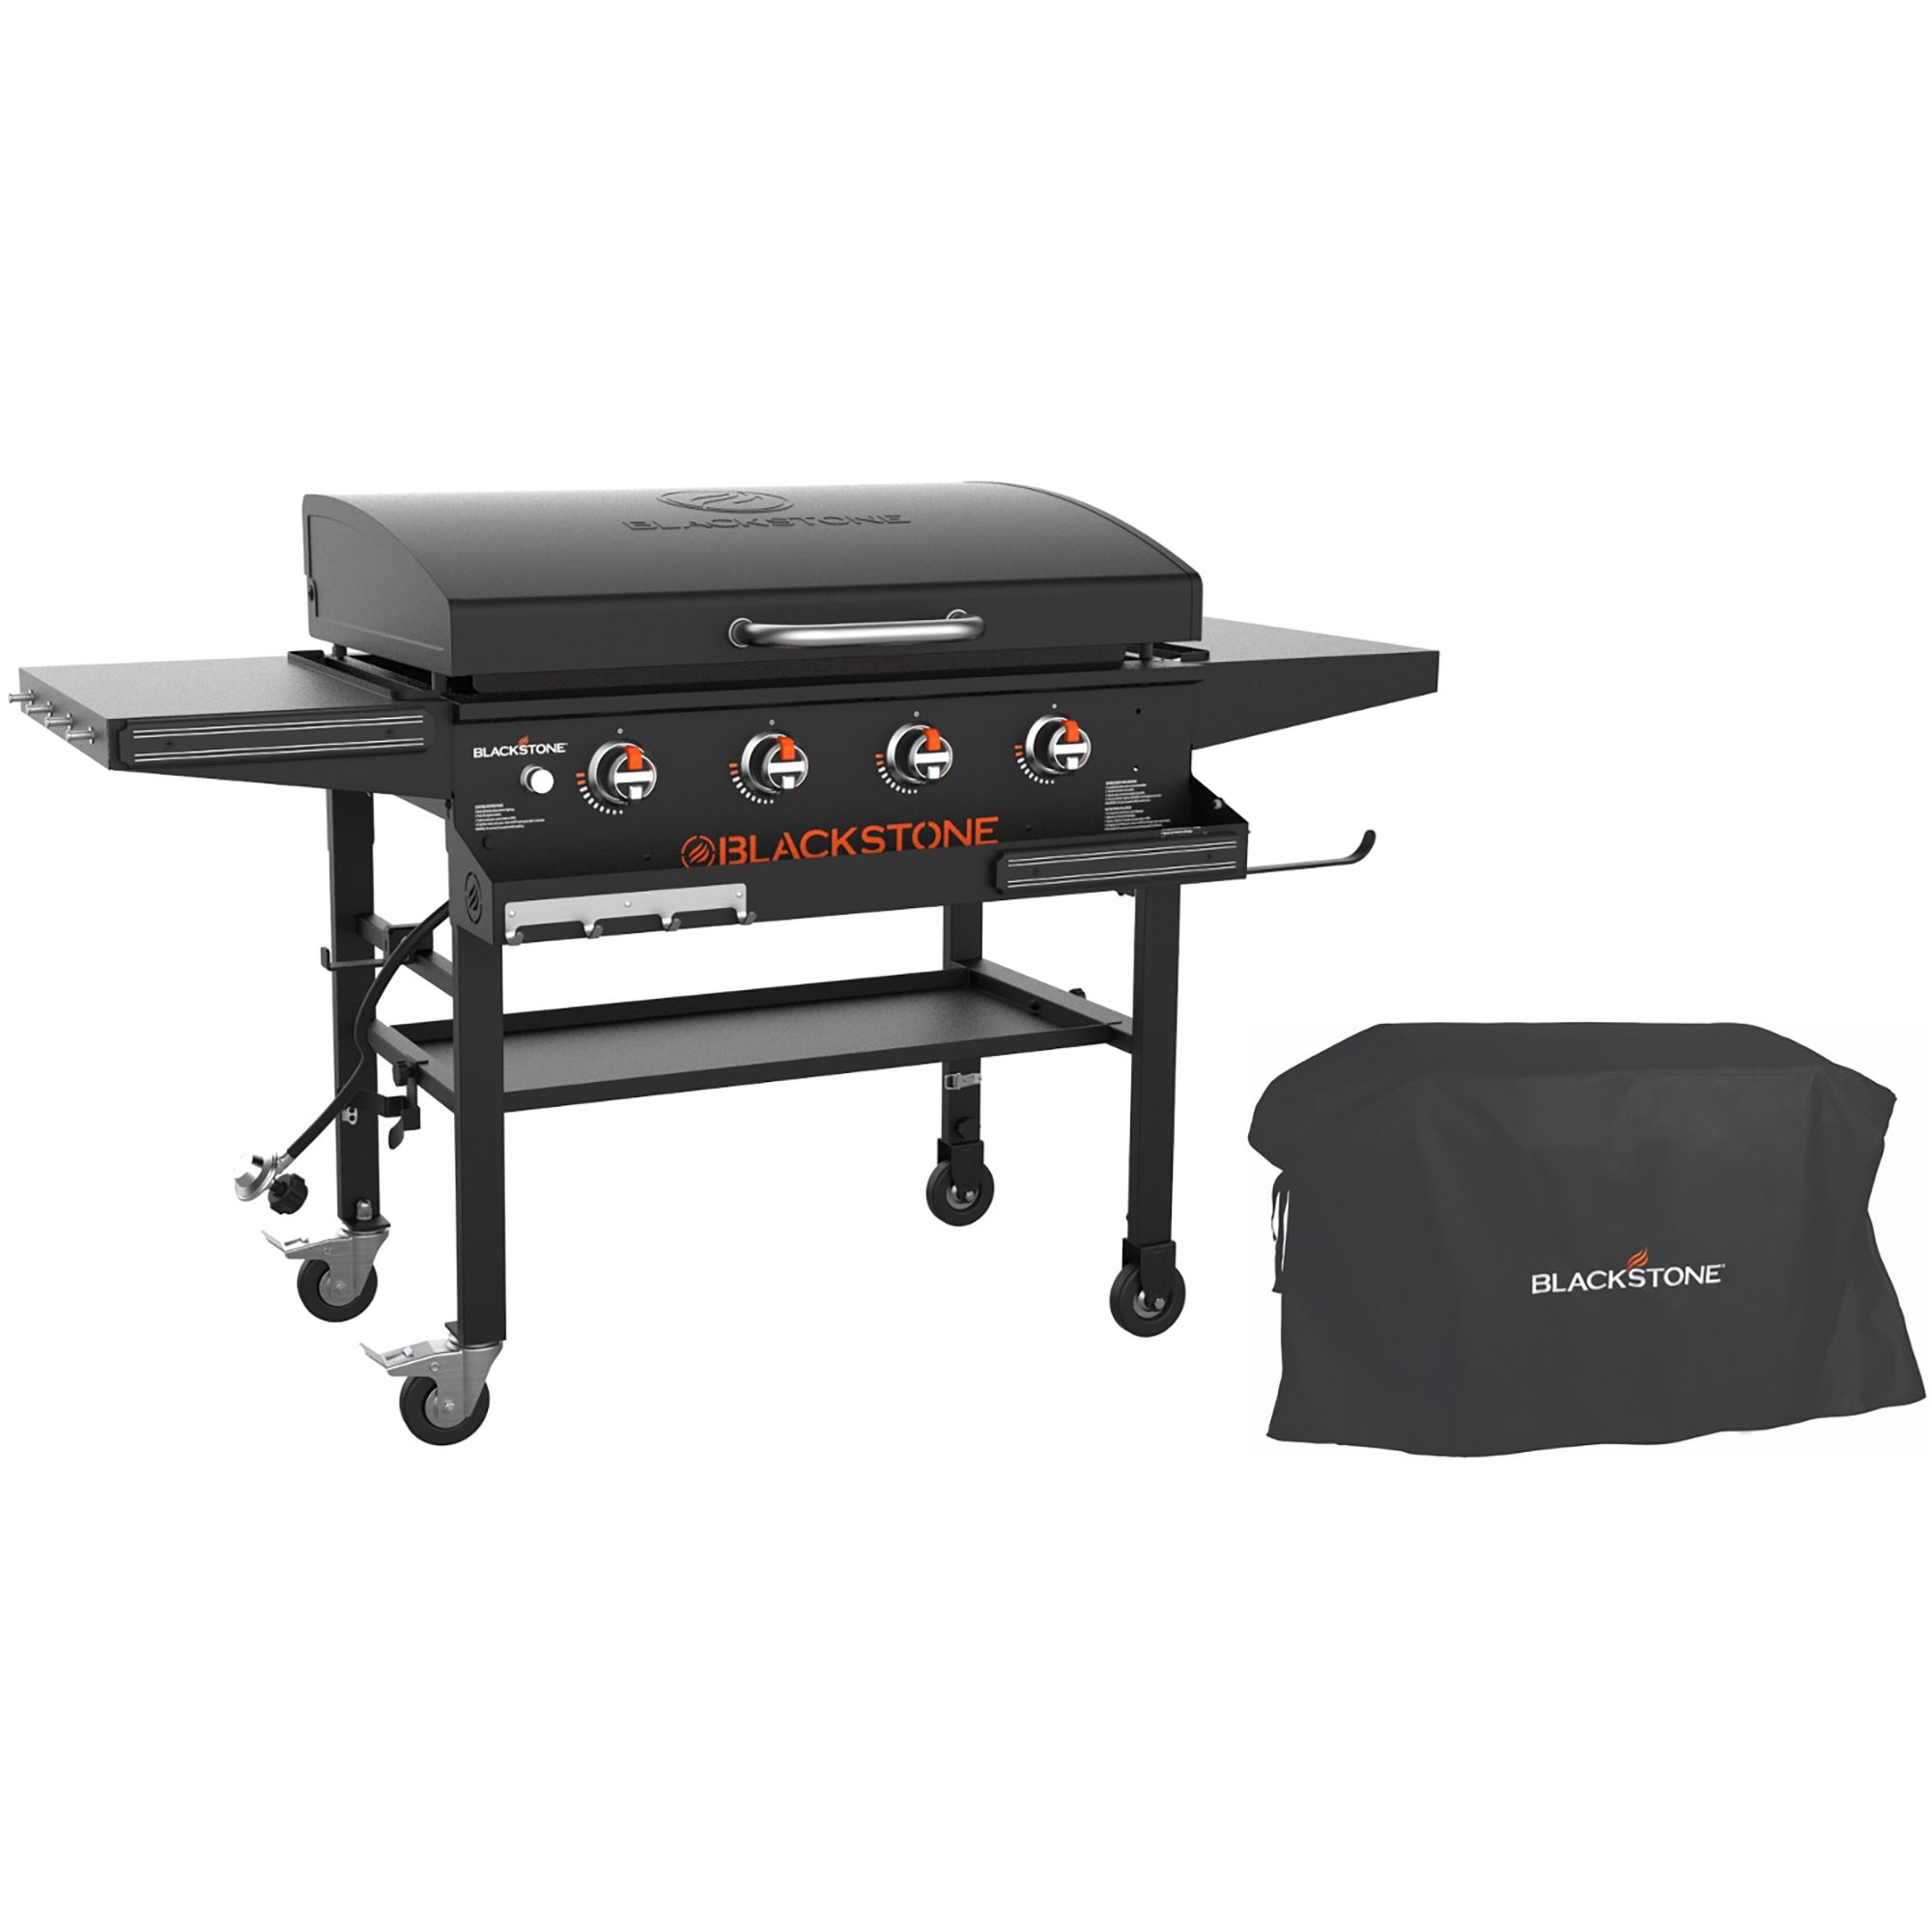 Blackstone 36 Griddle with Integrated Hood Dual Horizontal Folding Shelves Fron